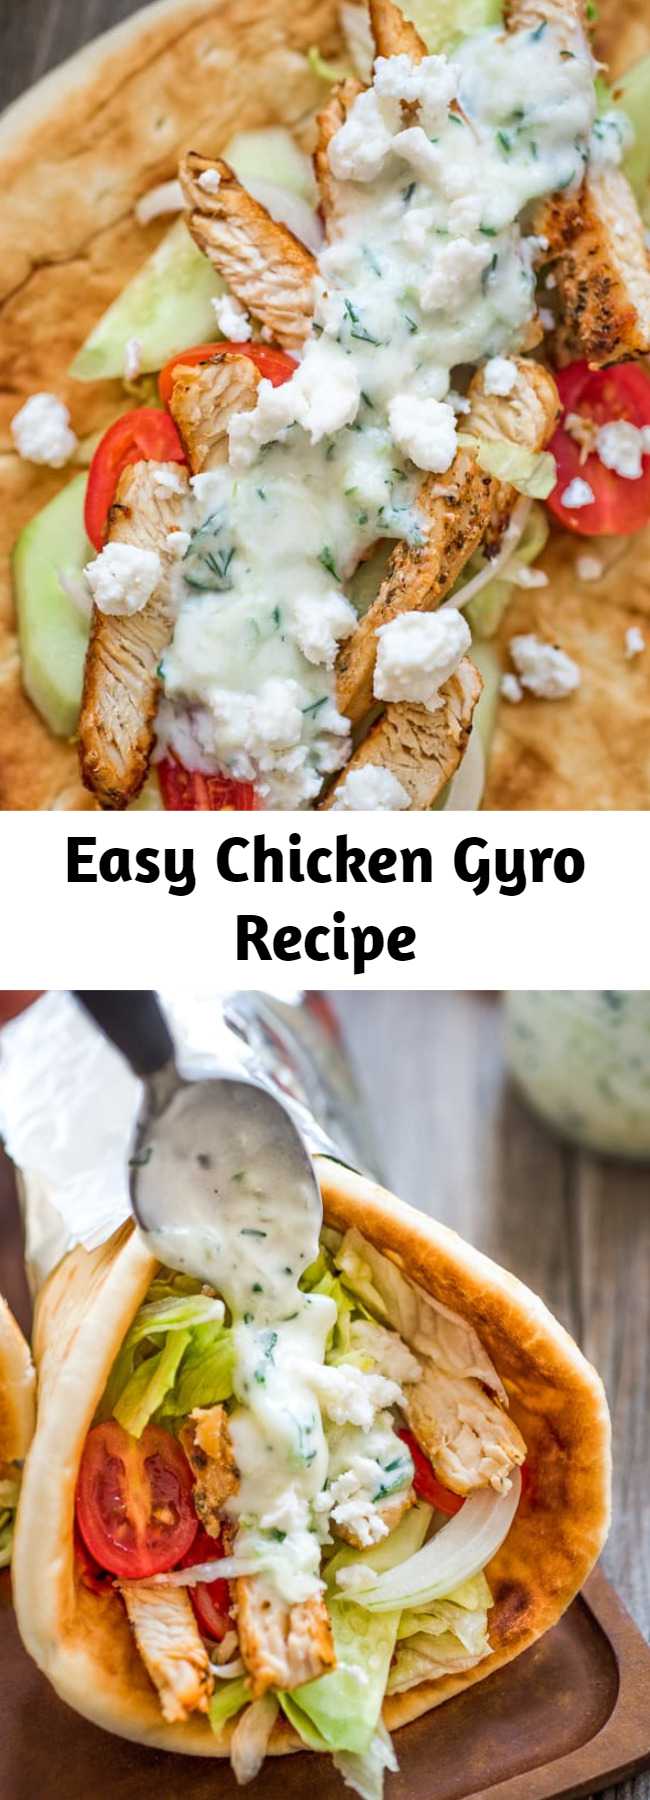 Easy Chicken Gyro Recipe - an easy to make sandwich, great for both lunch and dinner. Served with fresh vegetables and tzatziki sauce. If you haven’t tried a homemade Chicken Gyro yet, you are missing out! Fresh vegetables, tender chicken, tzatziki sauce, and feta cheese make an unforgettable combination! You’ll love it from the first bite. #chicken #lunch #sandwich #greek #healthyrecipe #dinner